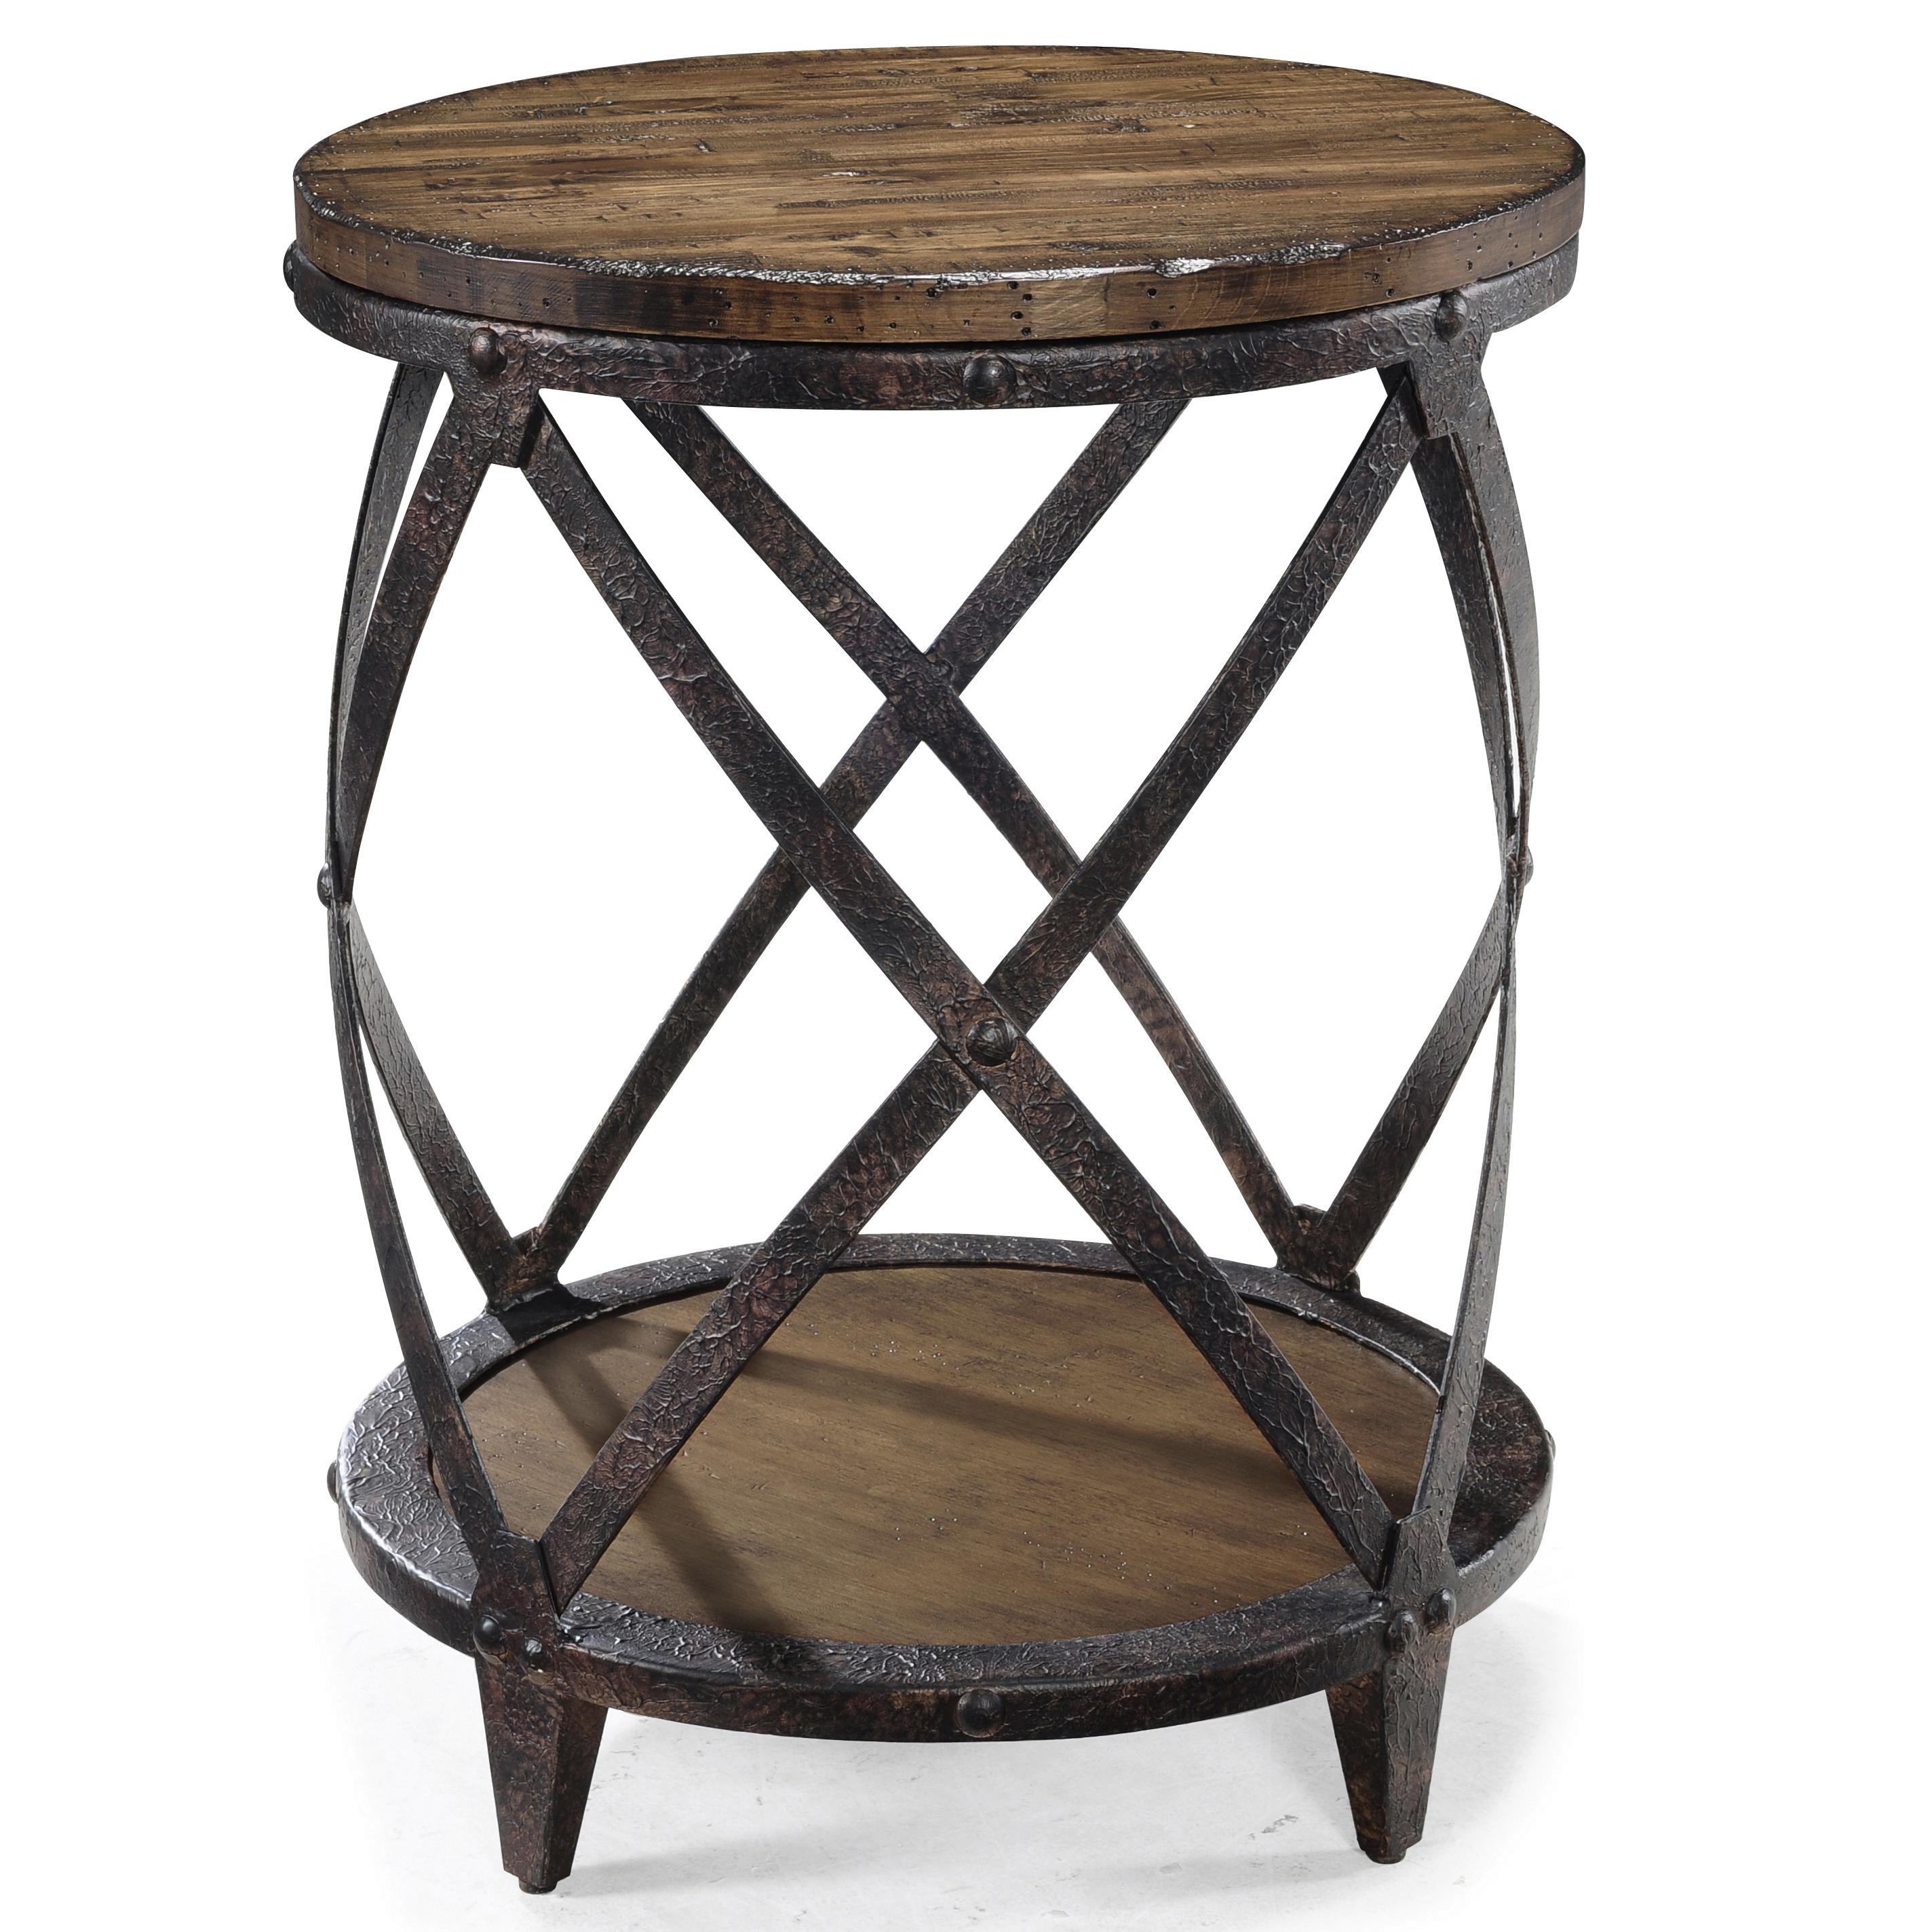 round accent end table with rustic iron legs magnussen home products color pinebrook small metal boutique floor lamps homesense patio furniture butler tray retro modern lighting